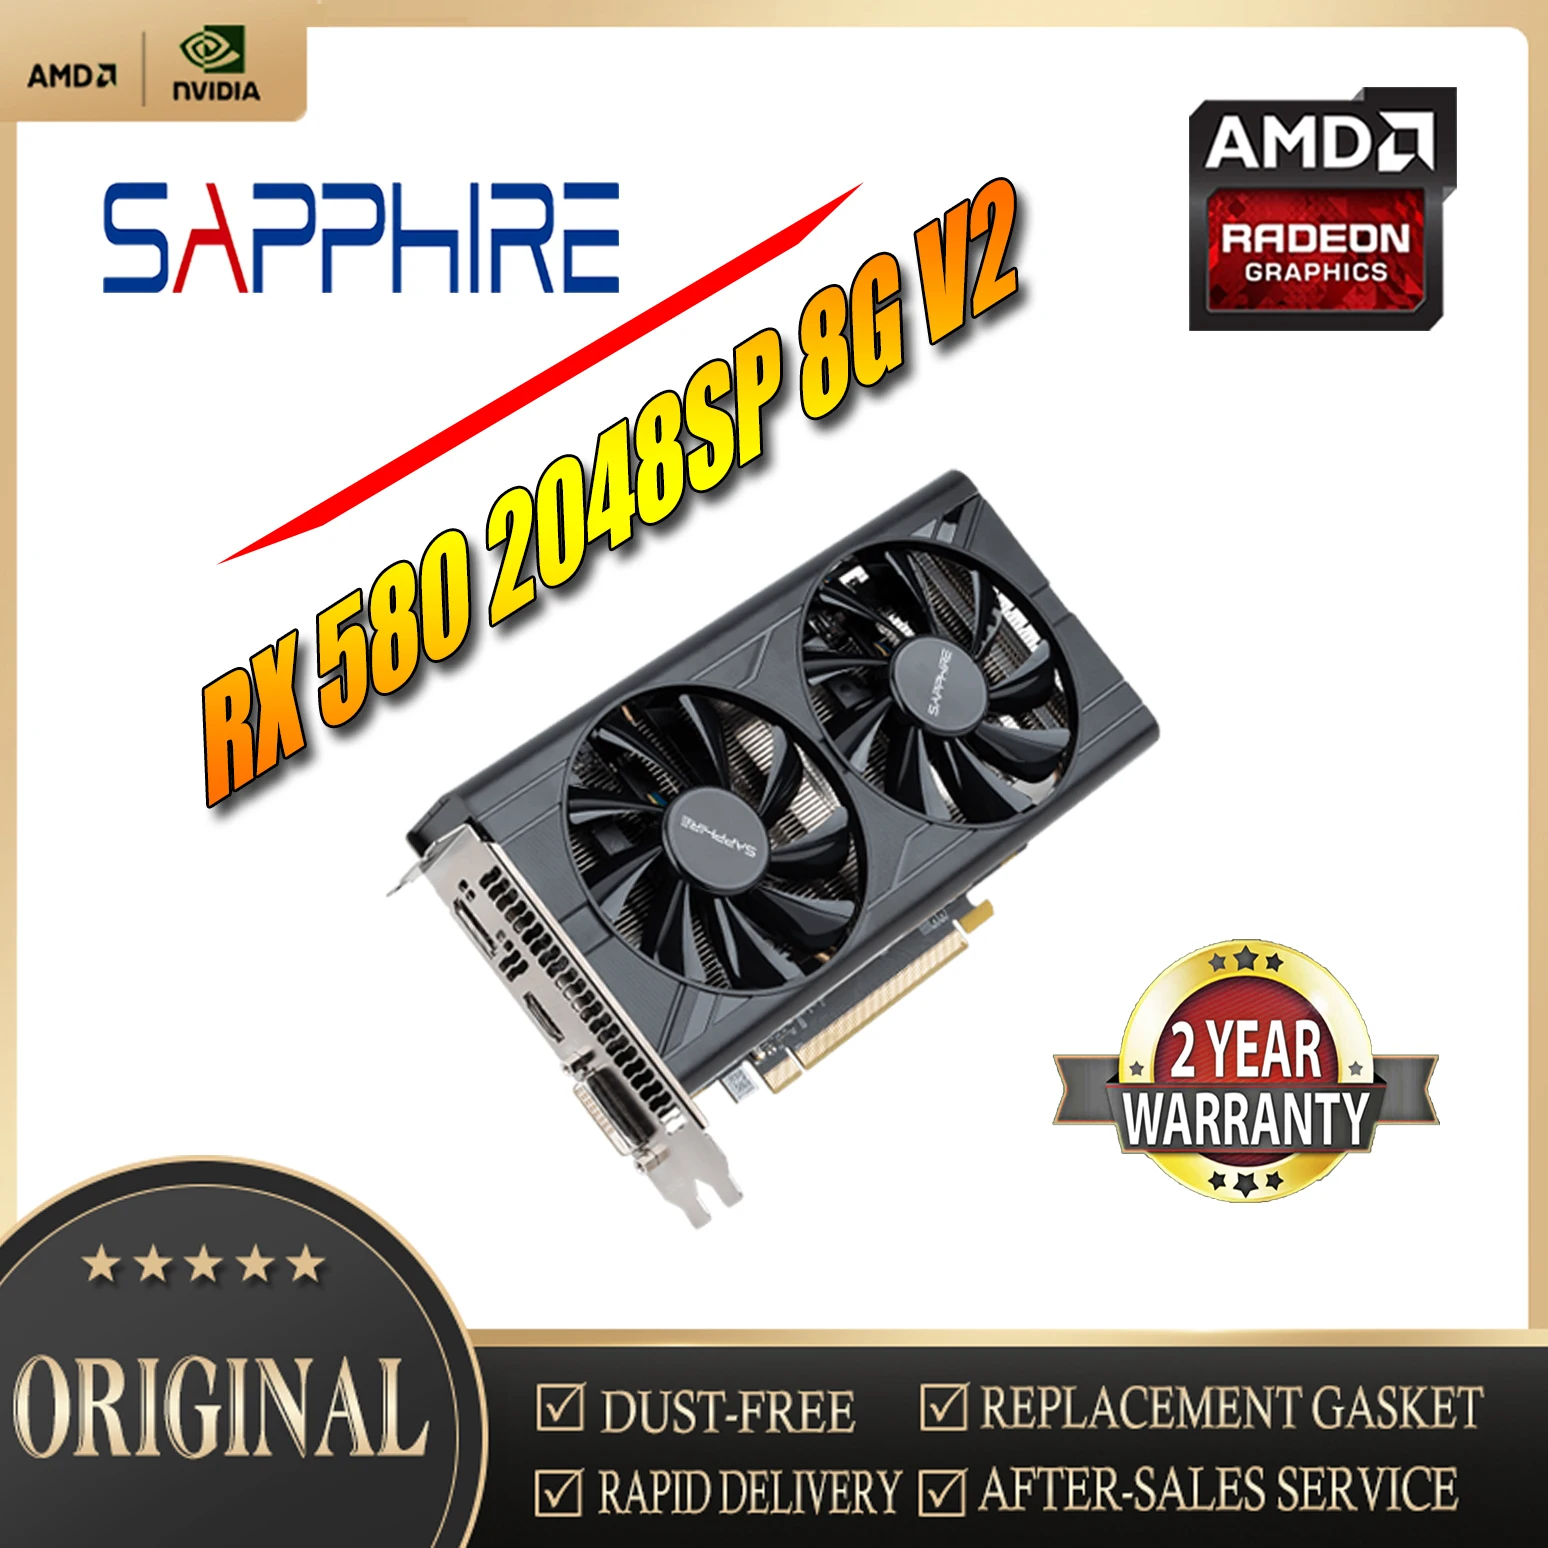 SAPPHIRE Radeon RX580 8G V2 2048SP  Graphics AMD Video Desktop PC Computer Game Map Used